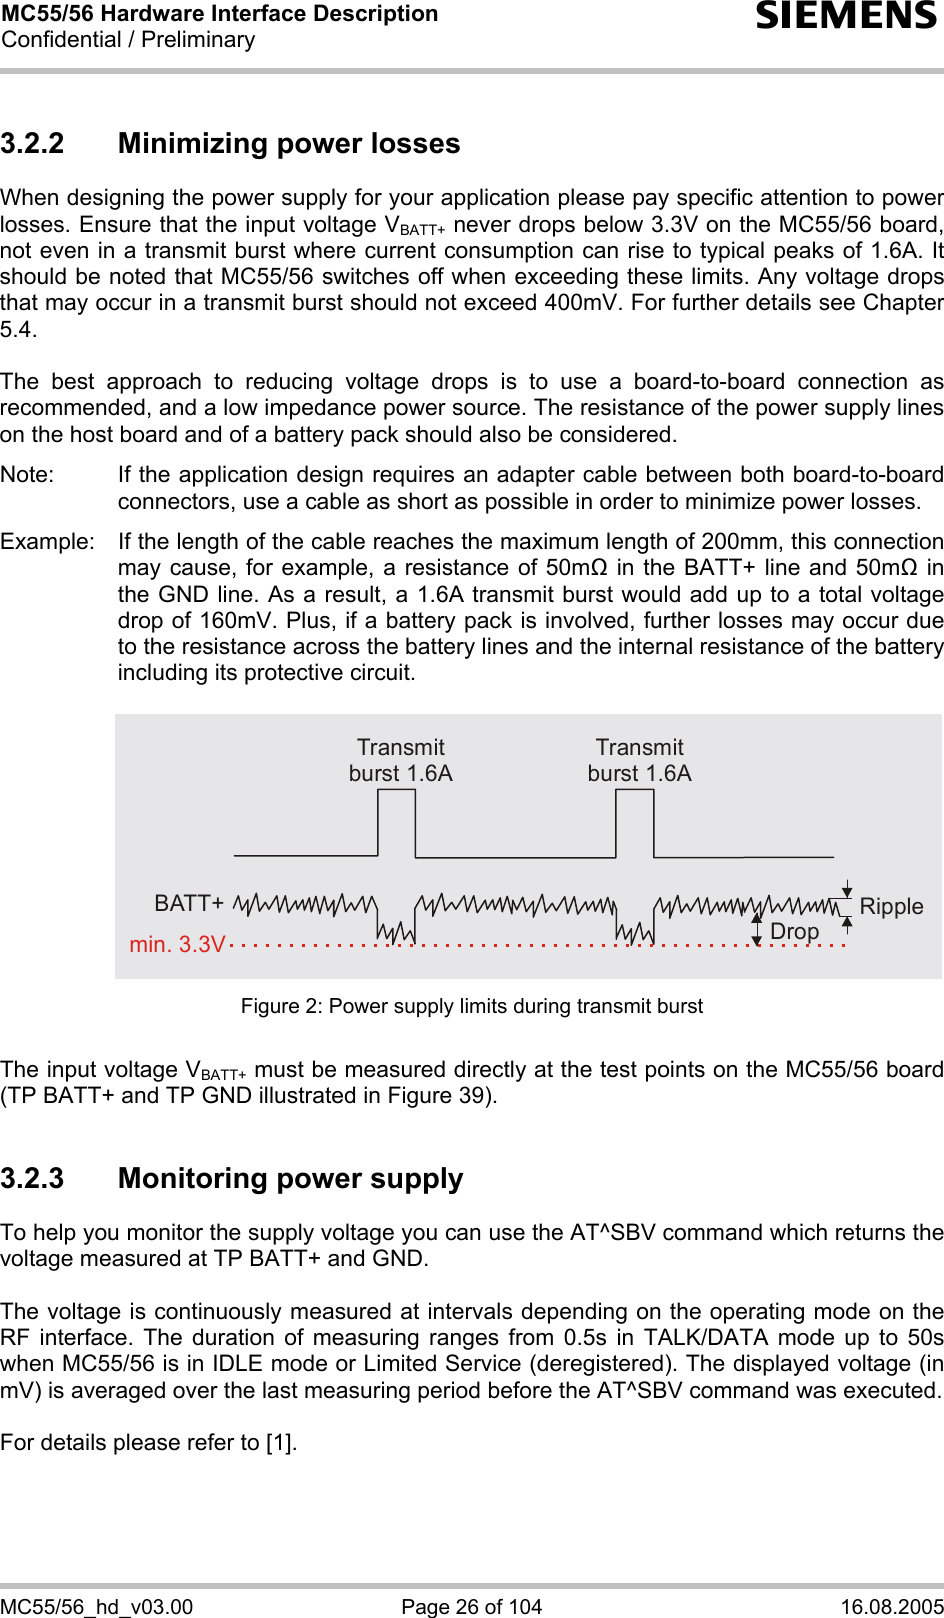 MC55/56 Hardware Interface Description Confidential / Preliminary s MC55/56_hd_v03.00  Page 26 of 104  16.08.2005 3.2.2  Minimizing power losses When designing the power supply for your application please pay specific attention to power losses. Ensure that the input voltage VBATT+ never drops below 3.3V on the MC55/56 board, not even in a transmit burst where current consumption can rise to typical peaks of 1.6A. It should be noted that MC55/56 switches off when exceeding these limits. Any voltage drops that may occur in a transmit burst should not exceed 400mV. For further details see Chapter 5.4.  The best approach to reducing voltage drops is to use a board-to-board connection as recommended, and a low impedance power source. The resistance of the power supply lines on the host board and of a battery pack should also be considered.  Note:  If the application design requires an adapter cable between both board-to-board connectors, use a cable as short as possible in order to minimize power losses.   Example:  If the length of the cable reaches the maximum length of 200mm, this connection may cause, for example, a resistance of 50m in the BATT+ line and 50m in the GND line. As a result, a 1.6A transmit burst would add up to a total voltage drop of 160mV. Plus, if a battery pack is involved, further losses may occur due to the resistance across the battery lines and the internal resistance of the battery including its protective circuit.   Transmit burst 1.6ATransmit burst 1.6ARippleDropmin. 3.3VBATT+ Figure 2: Power supply limits during transmit burst  The input voltage VBATT+ must be measured directly at the test points on the MC55/56 board (TP BATT+ and TP GND illustrated in Figure 39).  3.2.3  Monitoring power supply To help you monitor the supply voltage you can use the AT^SBV command which returns the voltage measured at TP BATT+ and GND.   The voltage is continuously measured at intervals depending on the operating mode on the RF interface. The duration of measuring ranges from 0.5s in TALK/DATA mode up to 50s when MC55/56 is in IDLE mode or Limited Service (deregistered). The displayed voltage (in mV) is averaged over the last measuring period before the AT^SBV command was executed.   For details please refer to [1].  